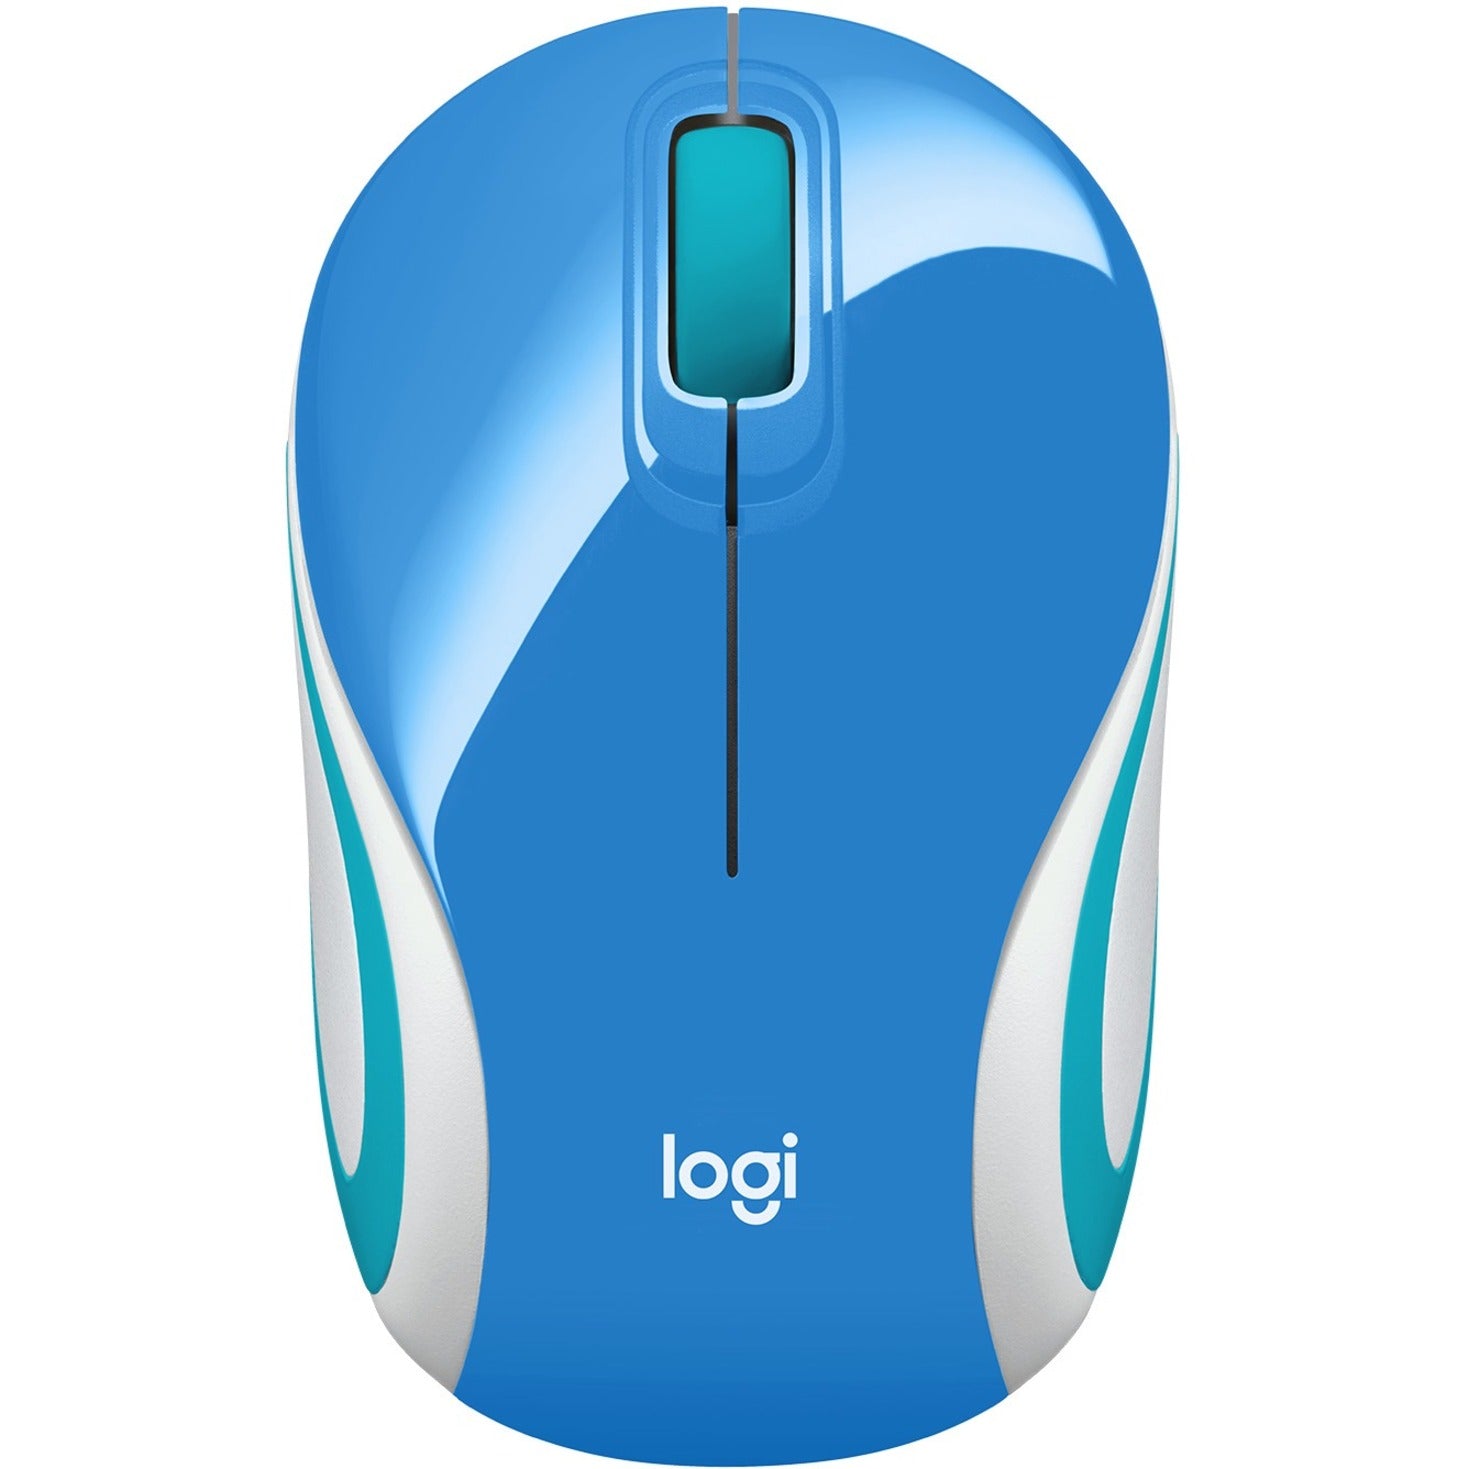 Logitech 910-005360 Wireless Mini Mouse M187 Ultra Portable, 2.4 GHz with USB Receiver, 1000 DPI Optical Tracking, 3-Buttons, PC / Mac / Laptop - Palace Blue